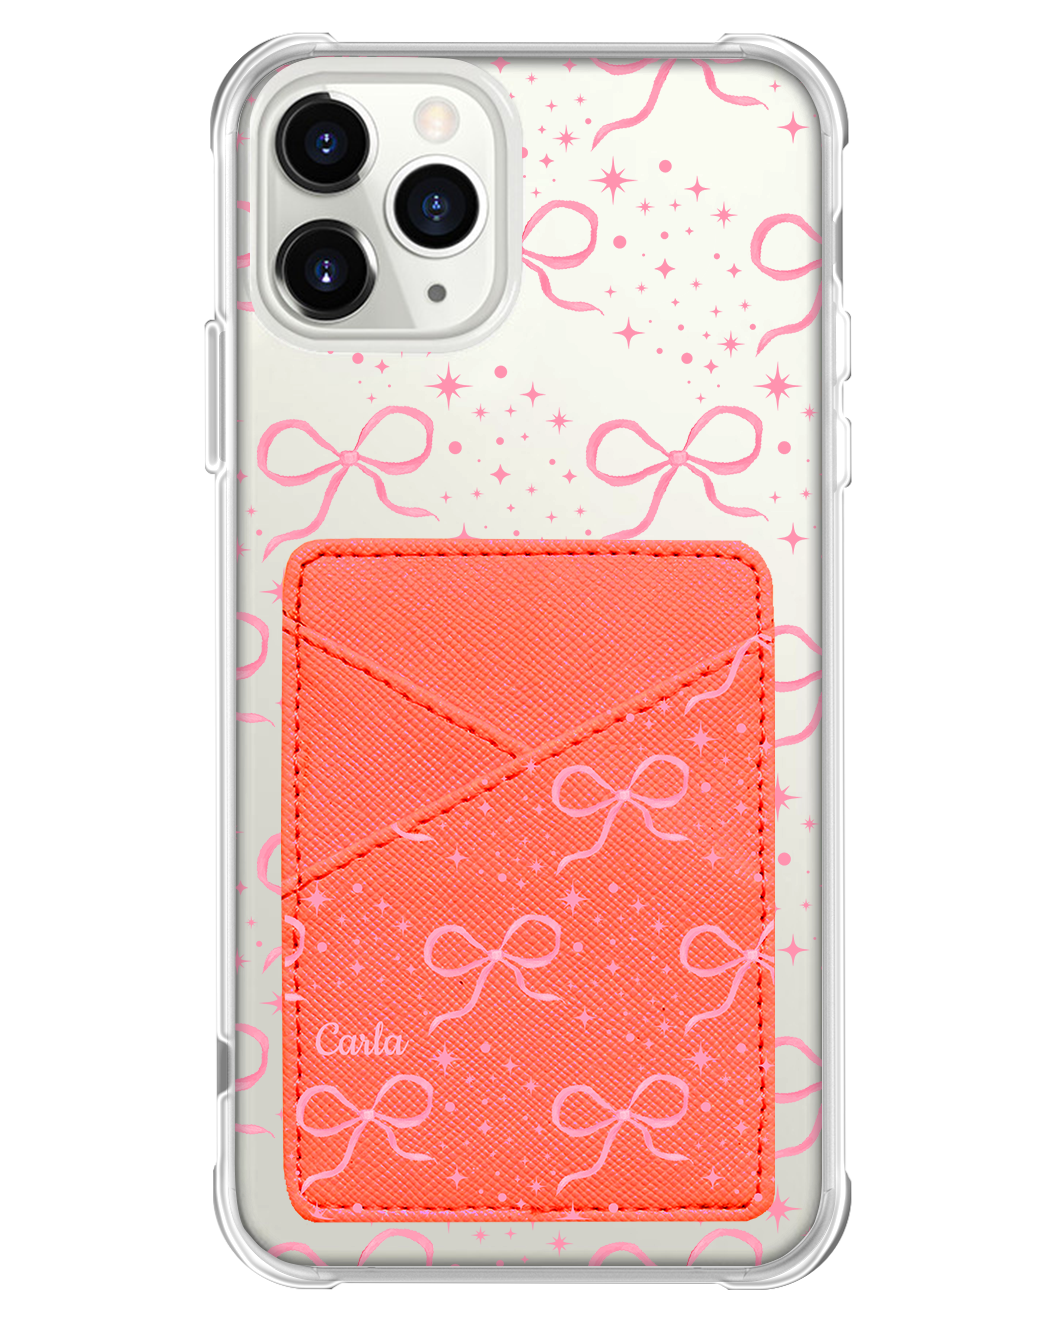 iPhone Phone Wallet Case - Coquette Glittery Bow